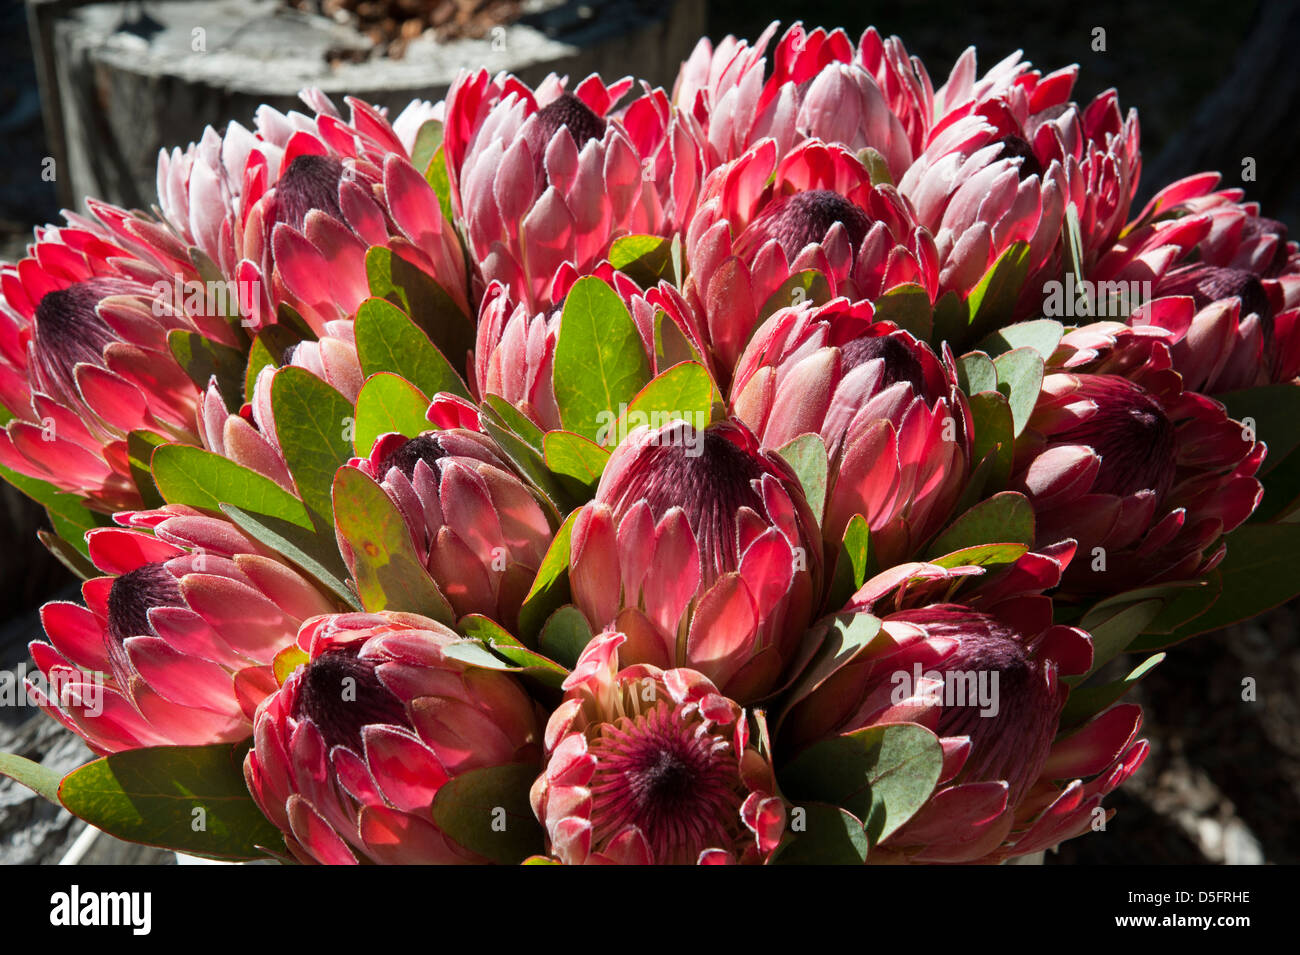 South African national flower the Protea Stock Photo